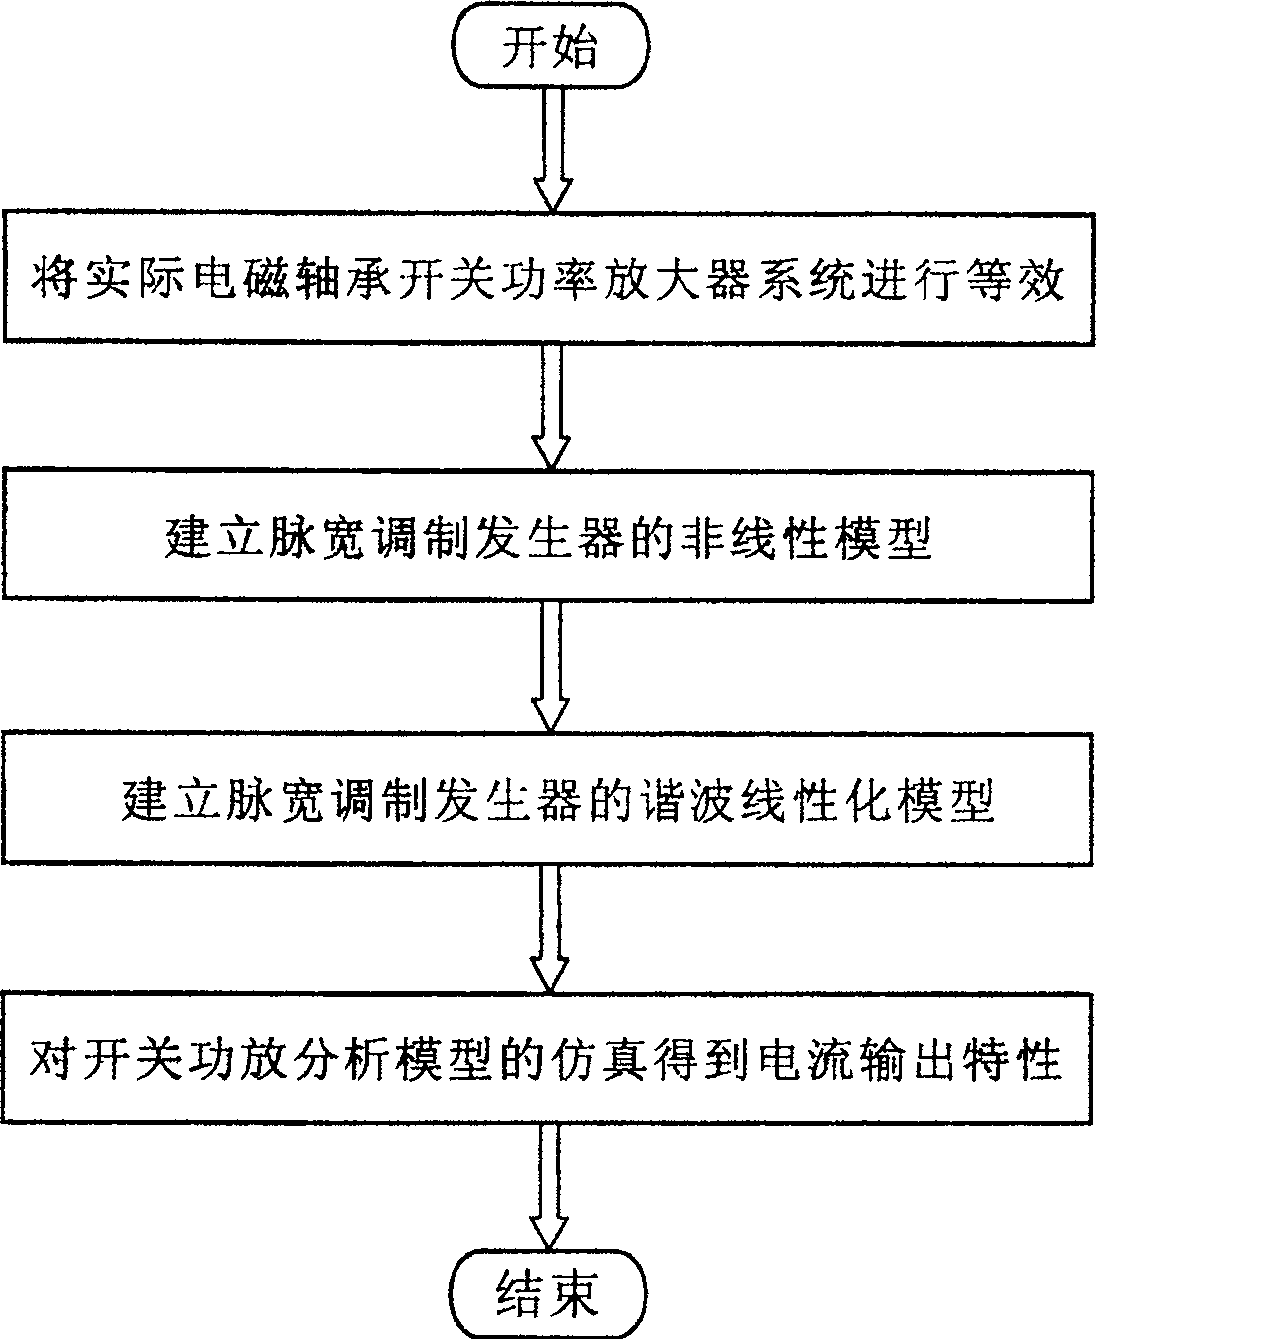 Analytical method for electromagnetic bearing switch power amplifier